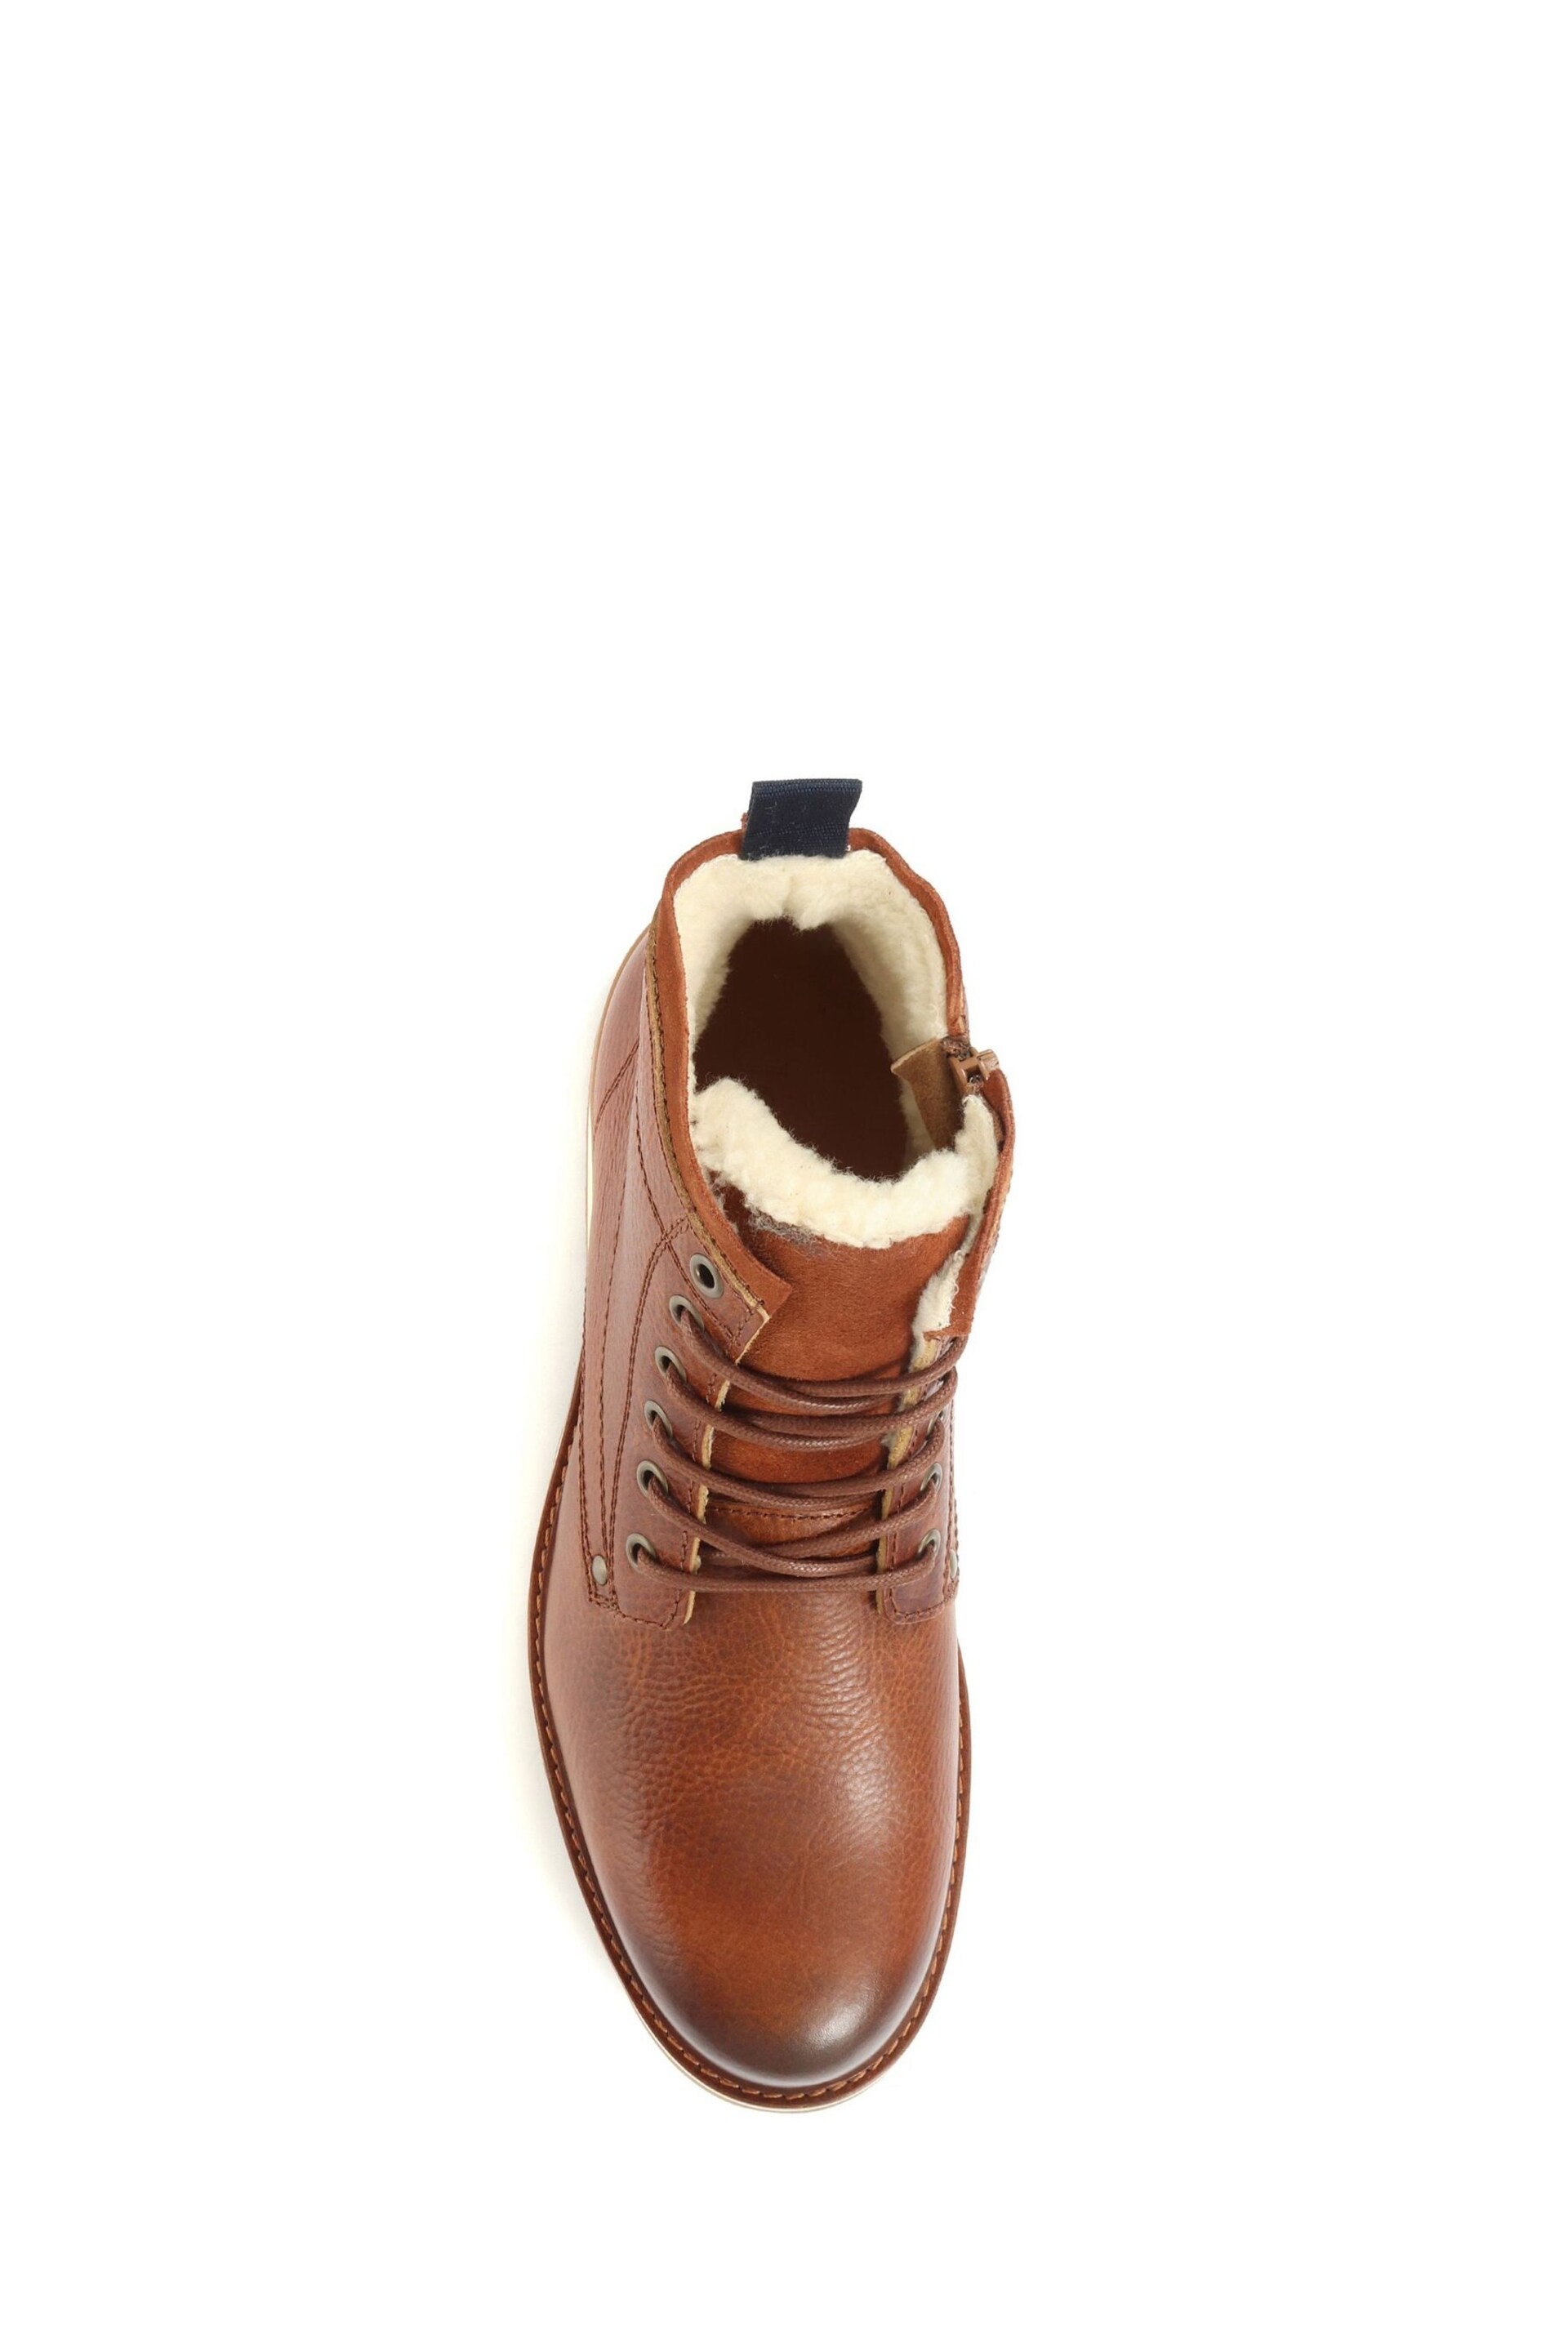 Jones Bootmaker Mens Ealing Leather Ankle Boots - Image 4 of 5